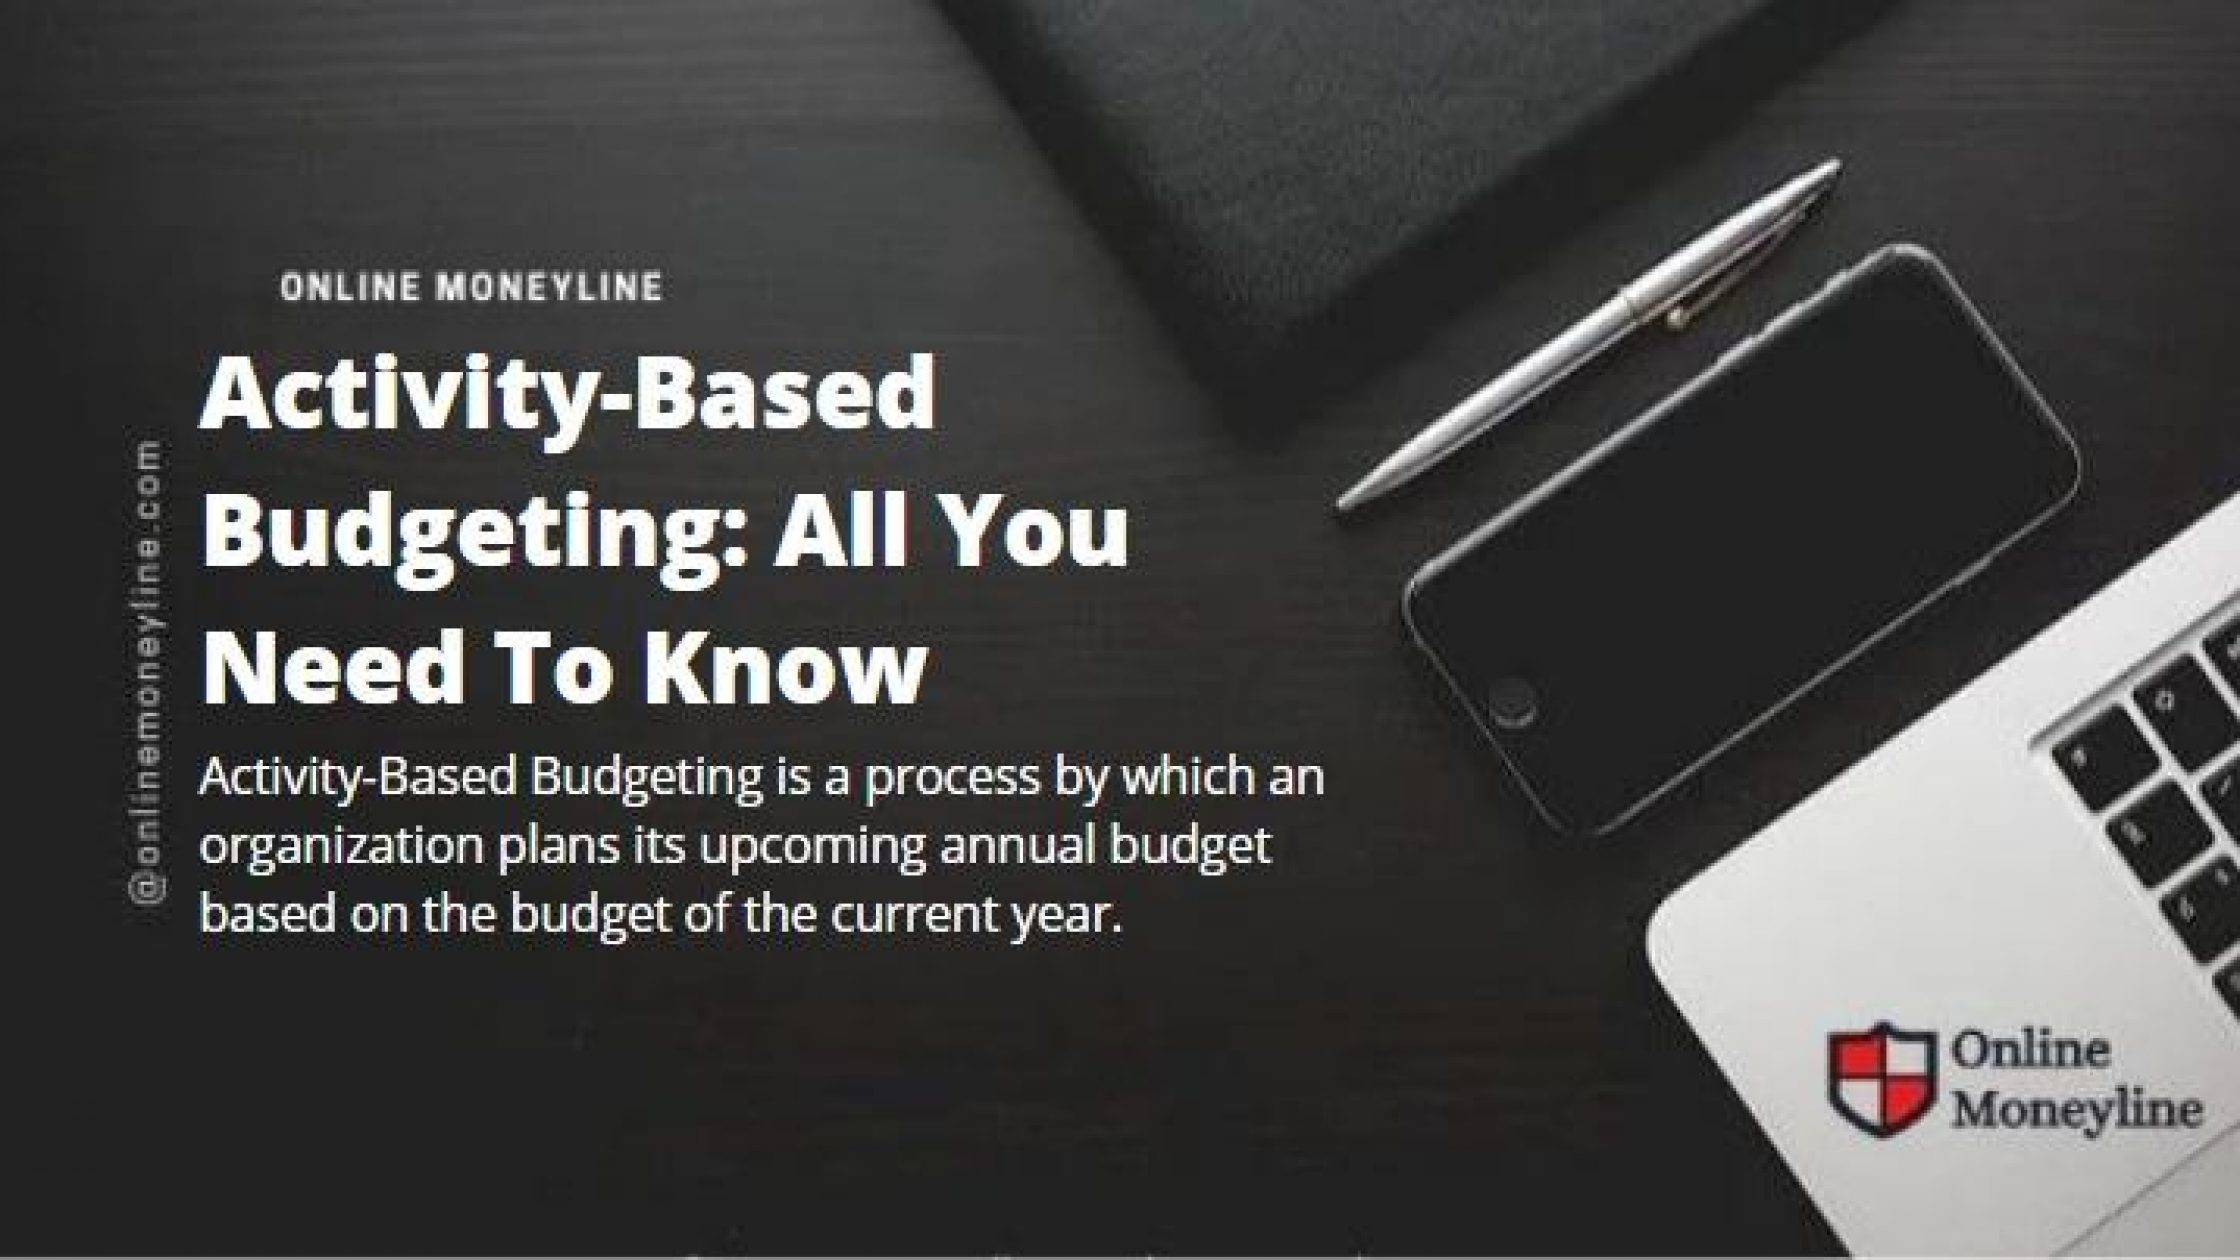 Activity-Based Budgeting: All You Need To Know